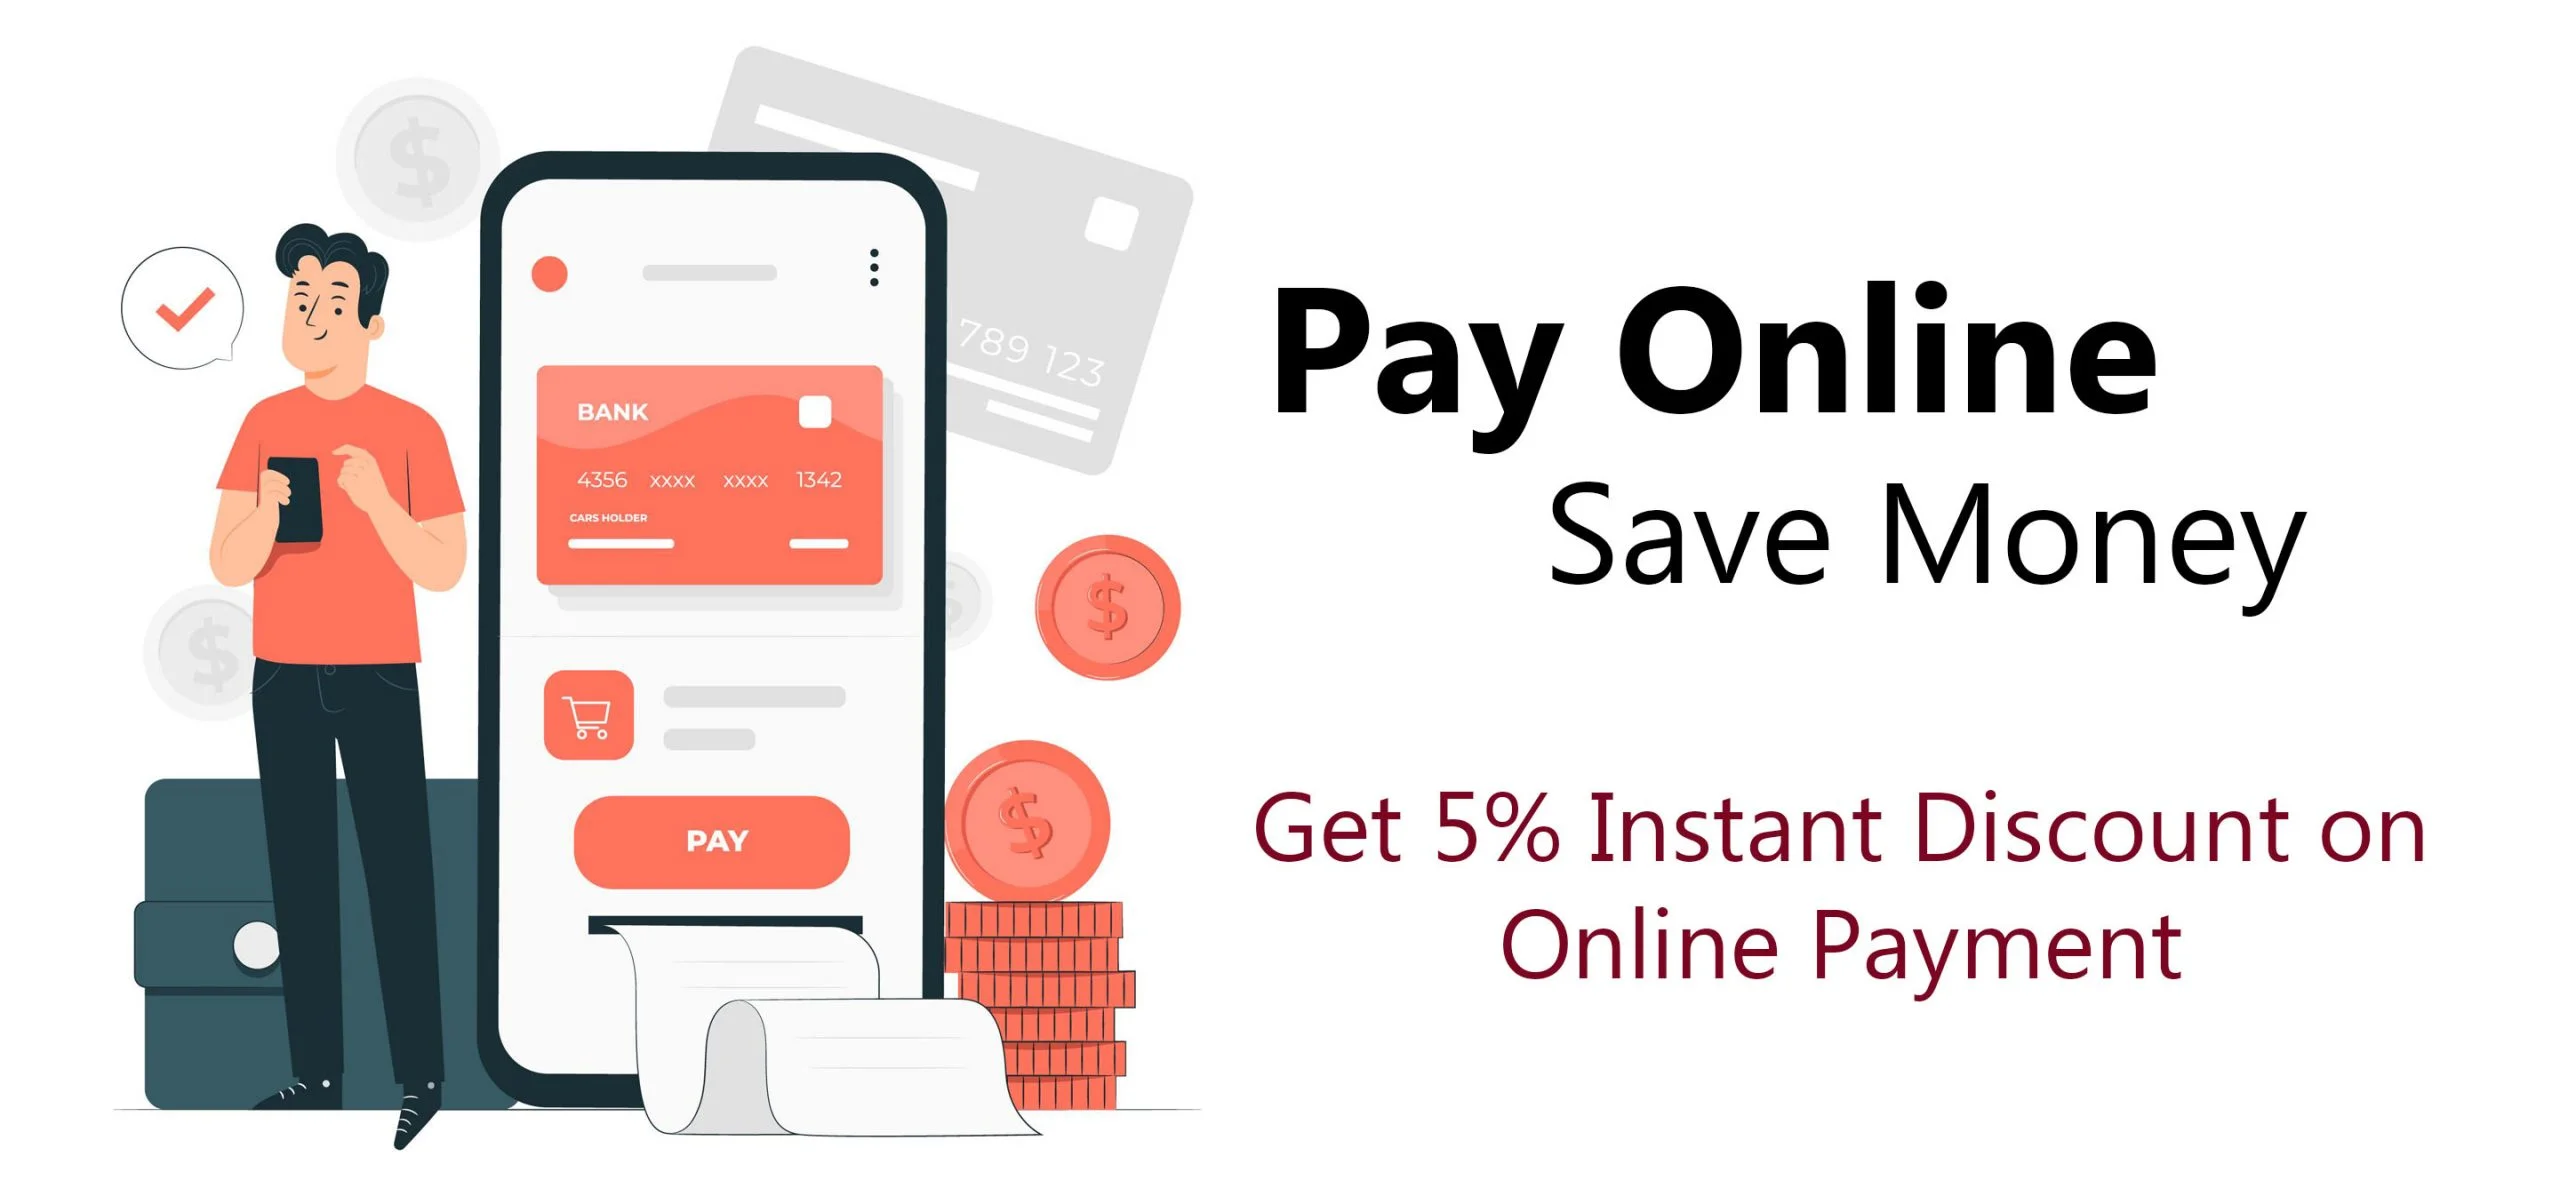 Pay Online Save Money